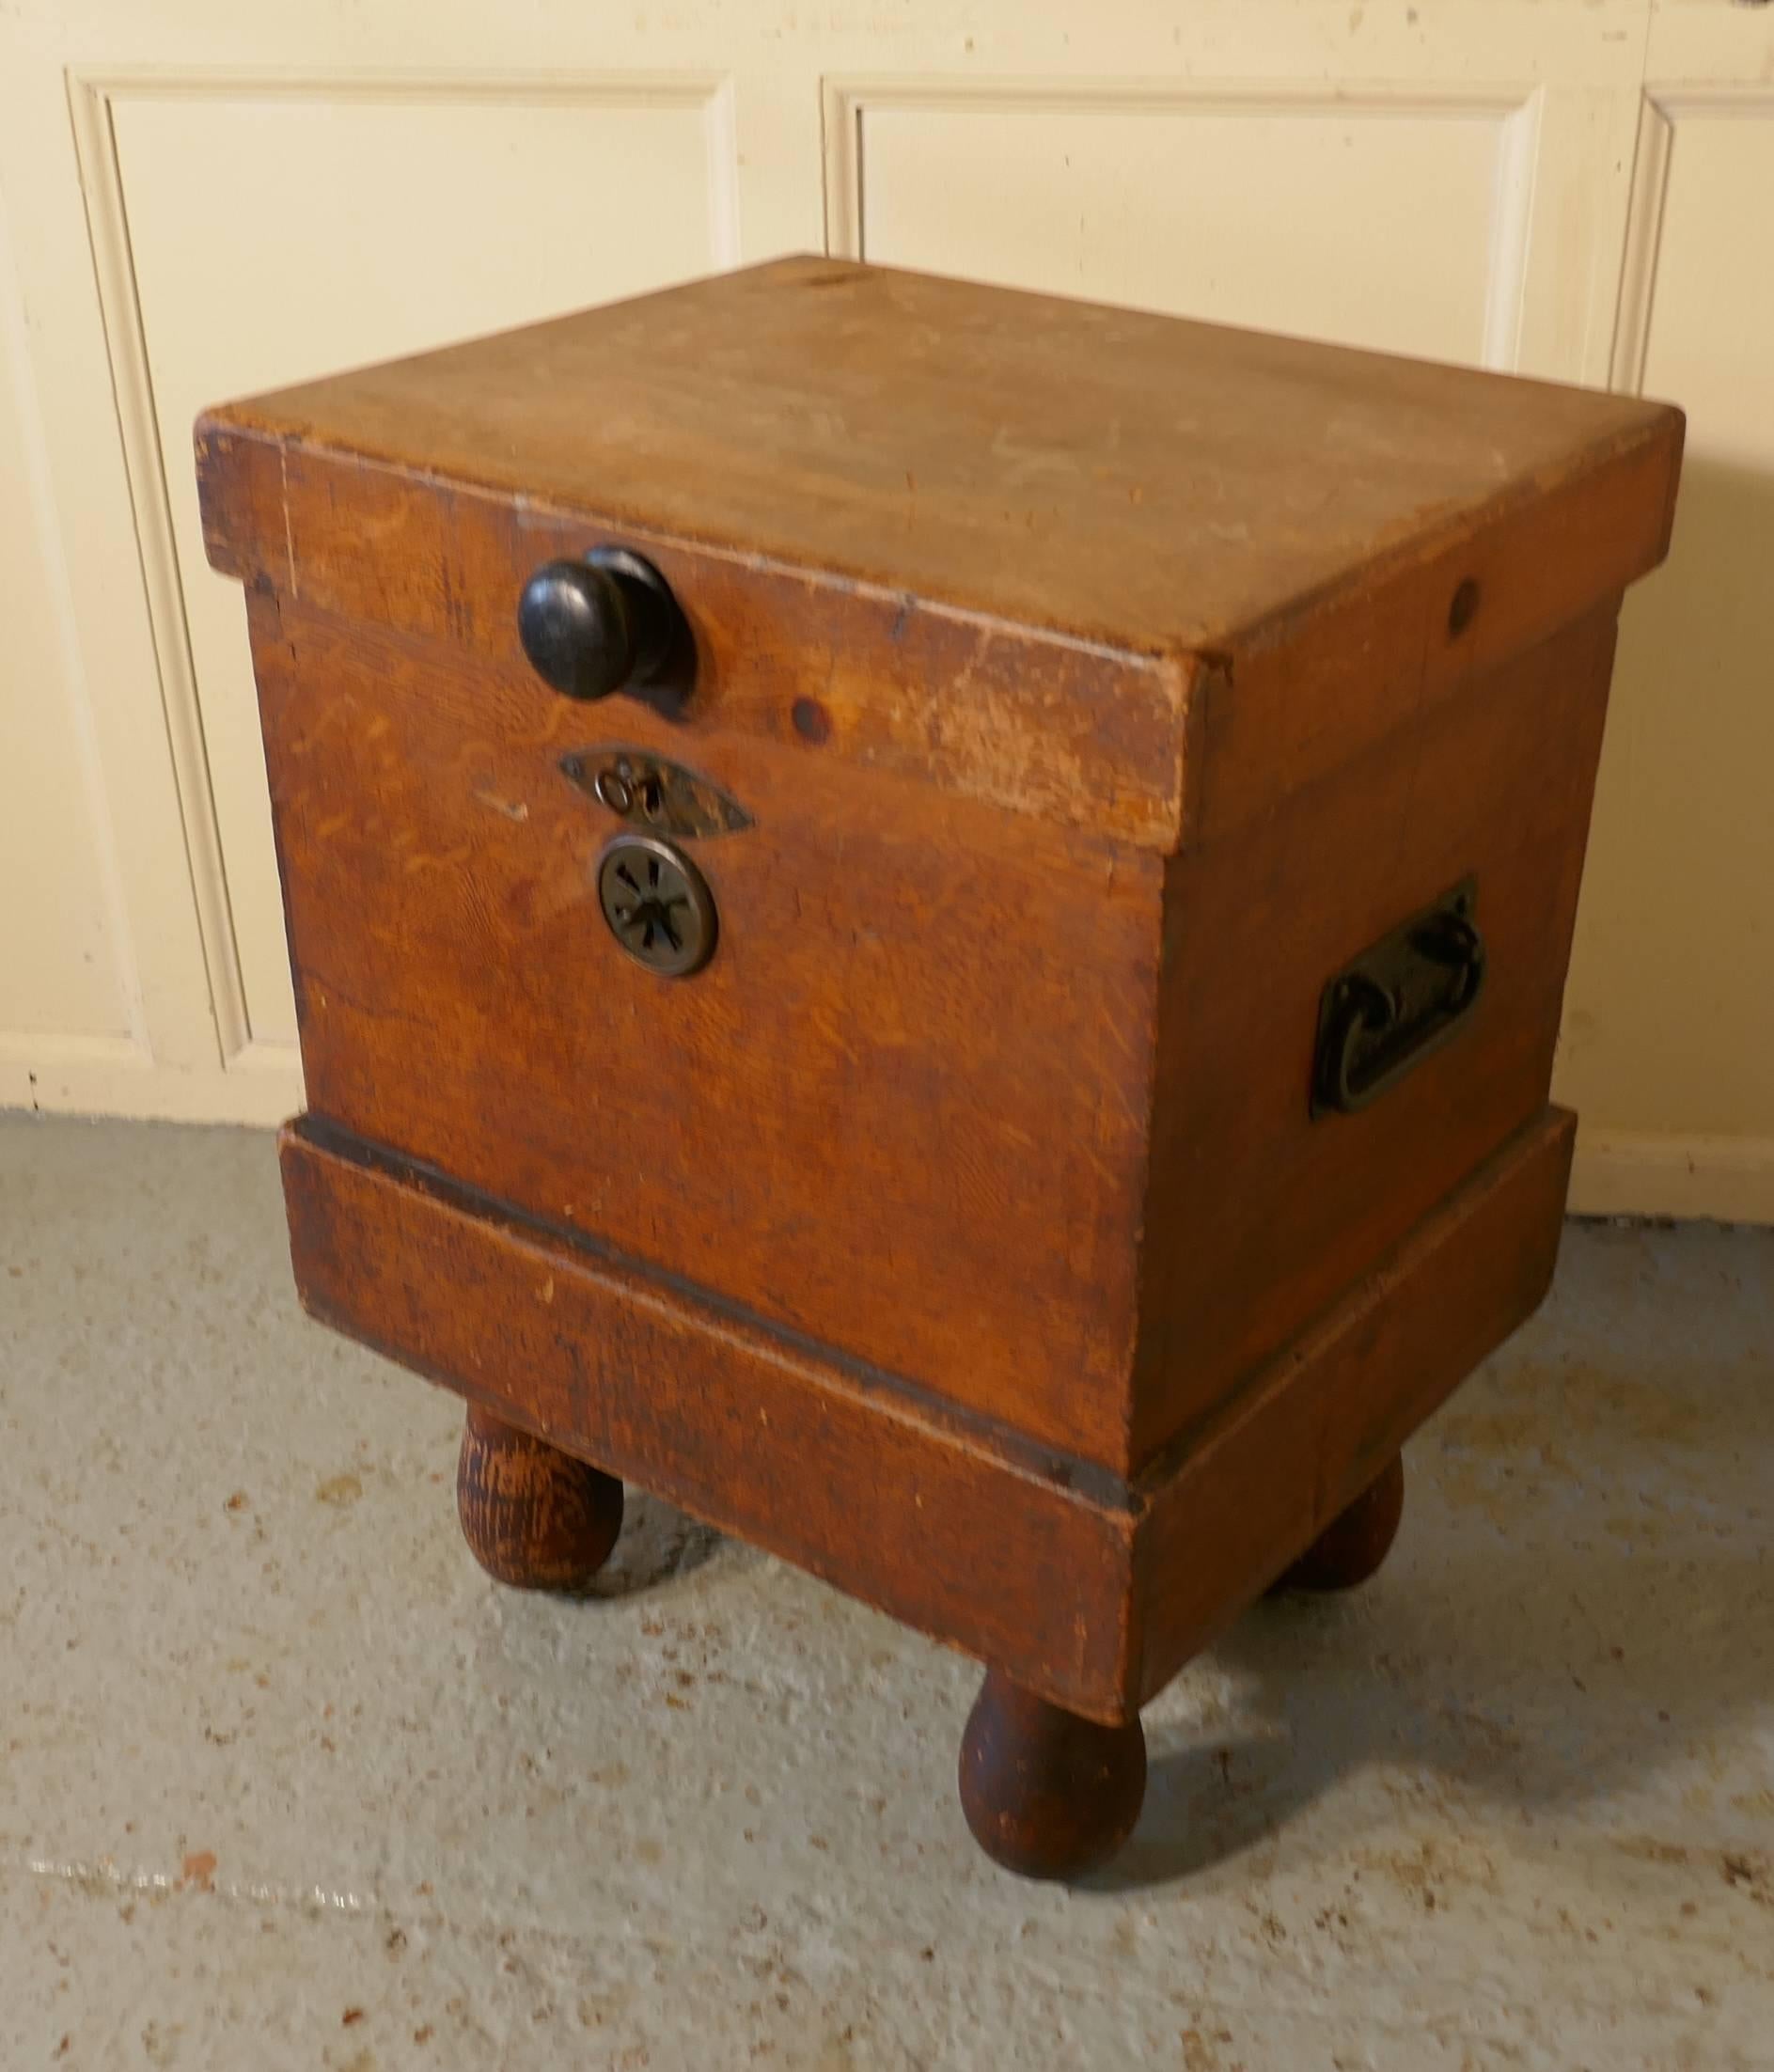 Country House Pine Ice Box or Refrigerator from around 1890

A great find, the ice box is in the form a square chest, it stands on chastered legs, this allows the drain hole beneath to be kept clear

A superb piece of Social History, this piece